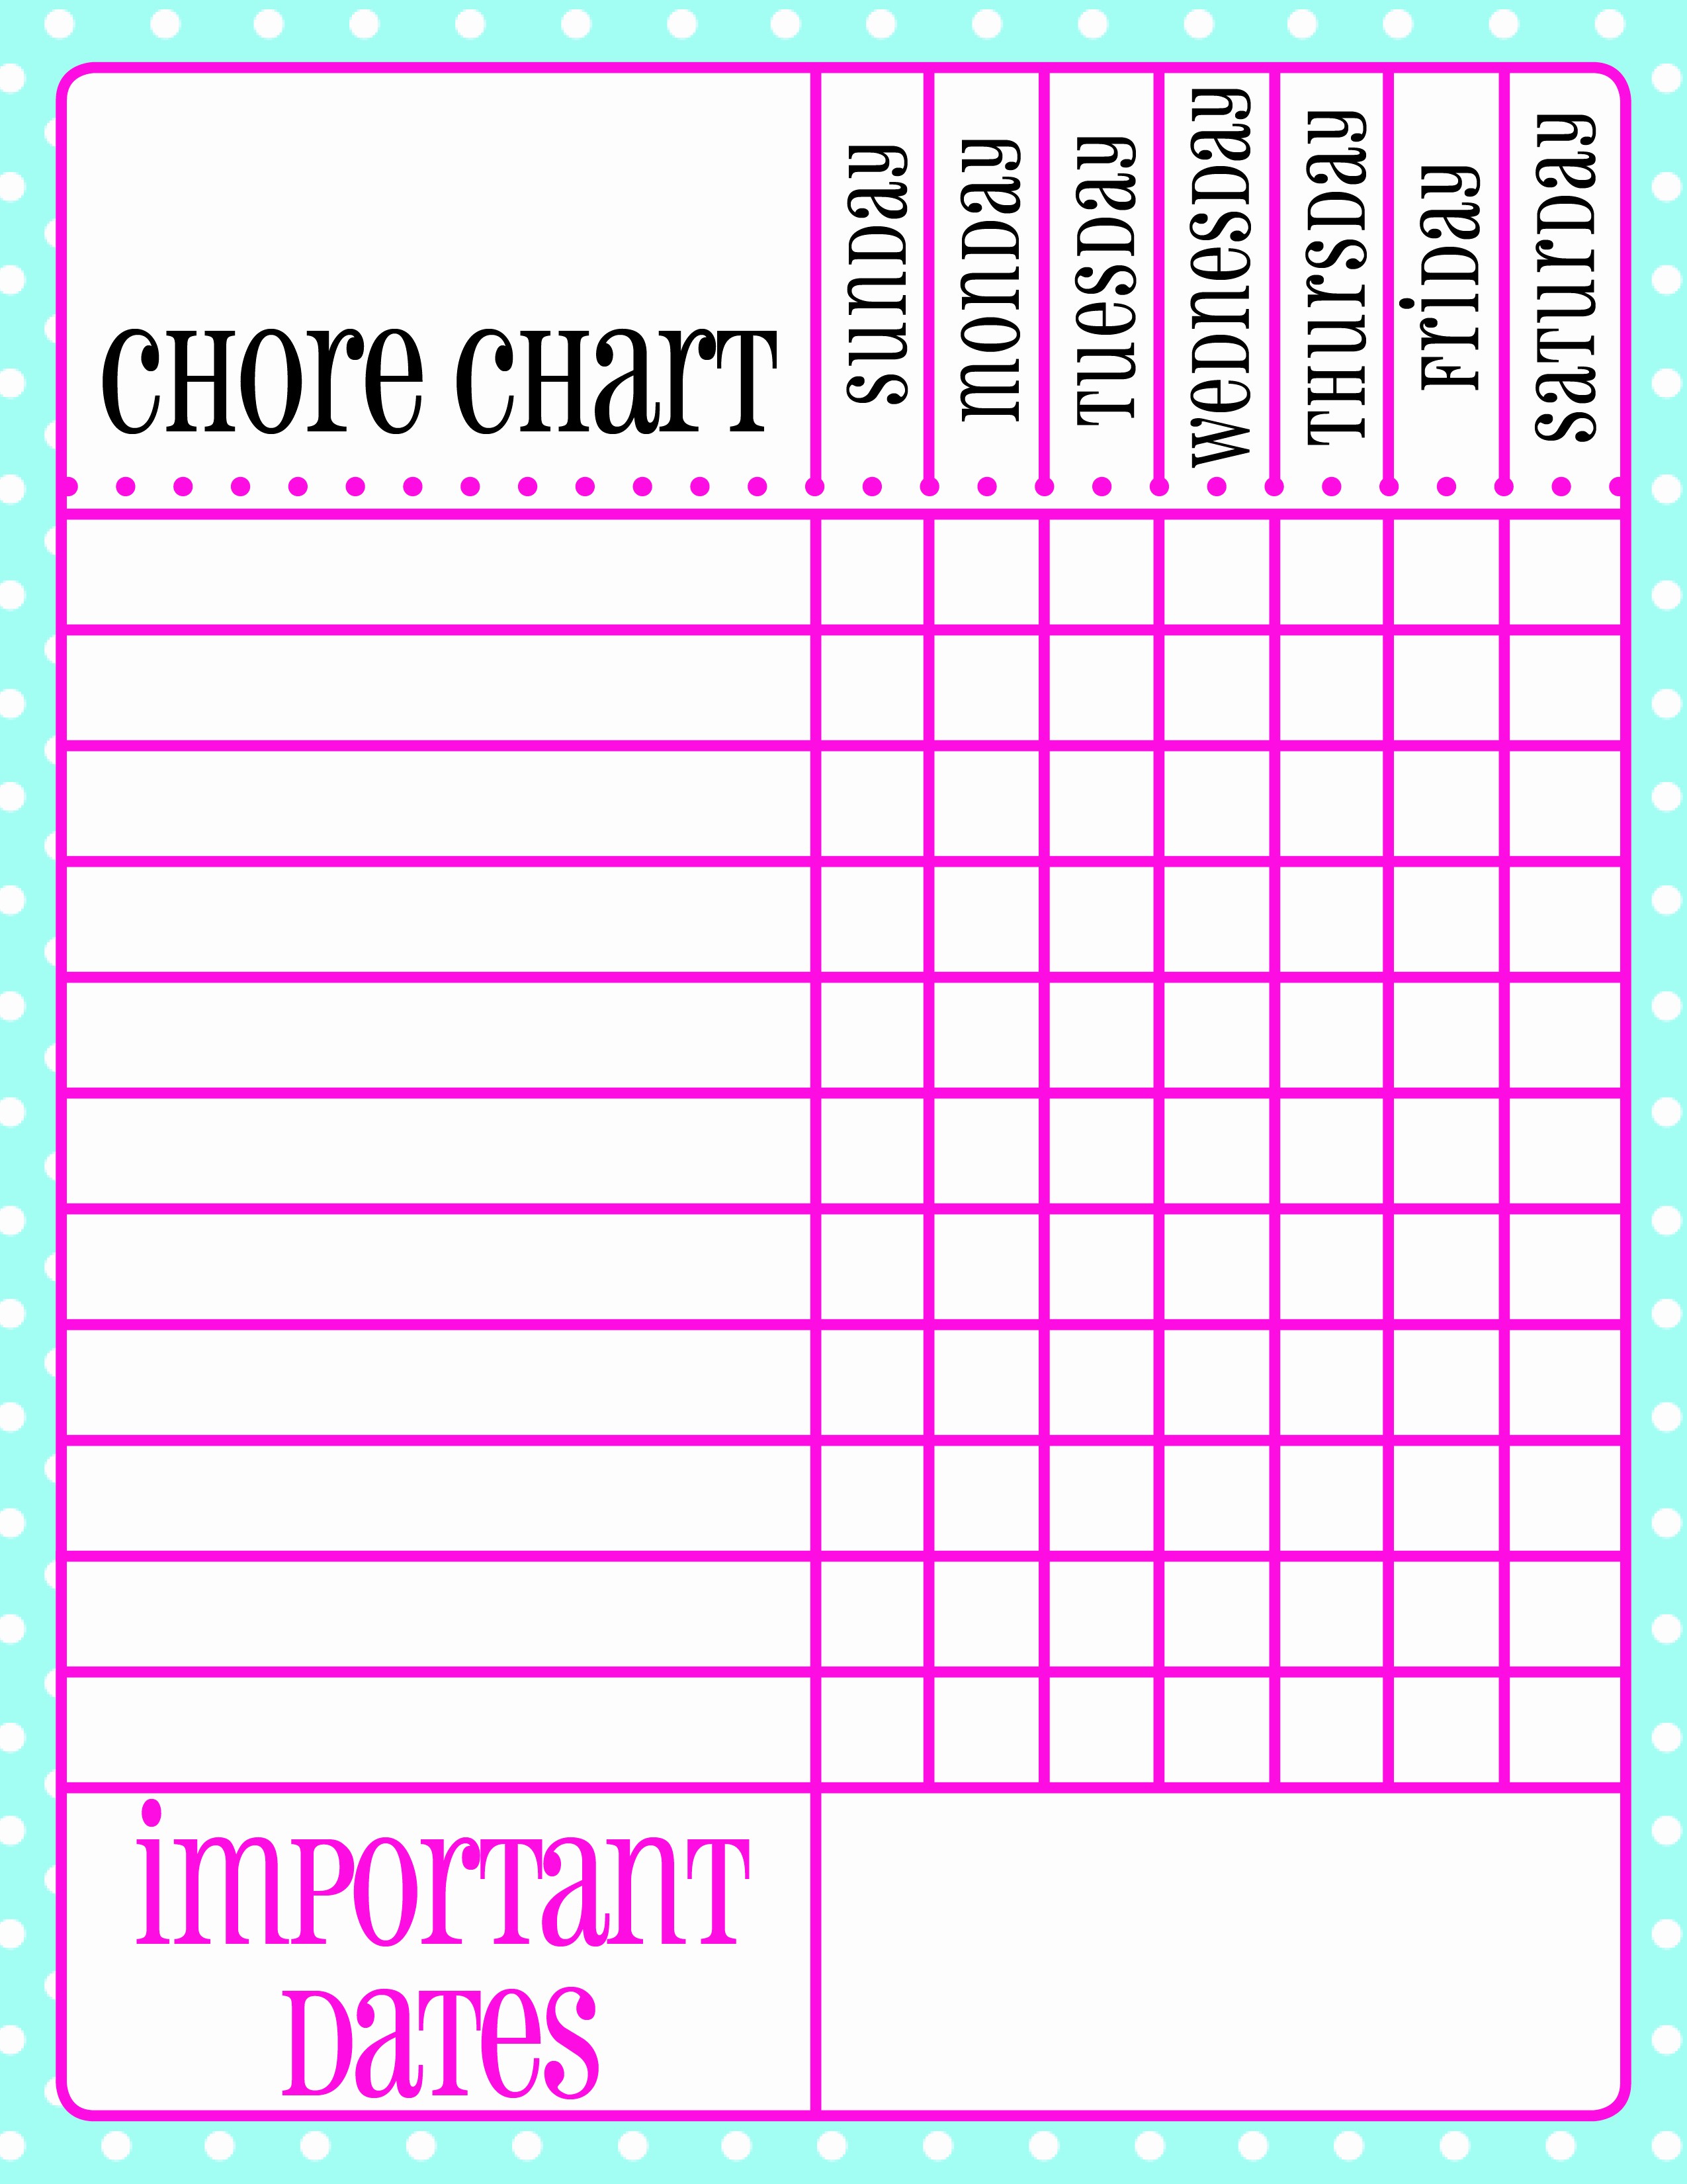 Chore Chart Template Free Download Best Of Free Printable Chore Chart – Palm Beach Print Shop